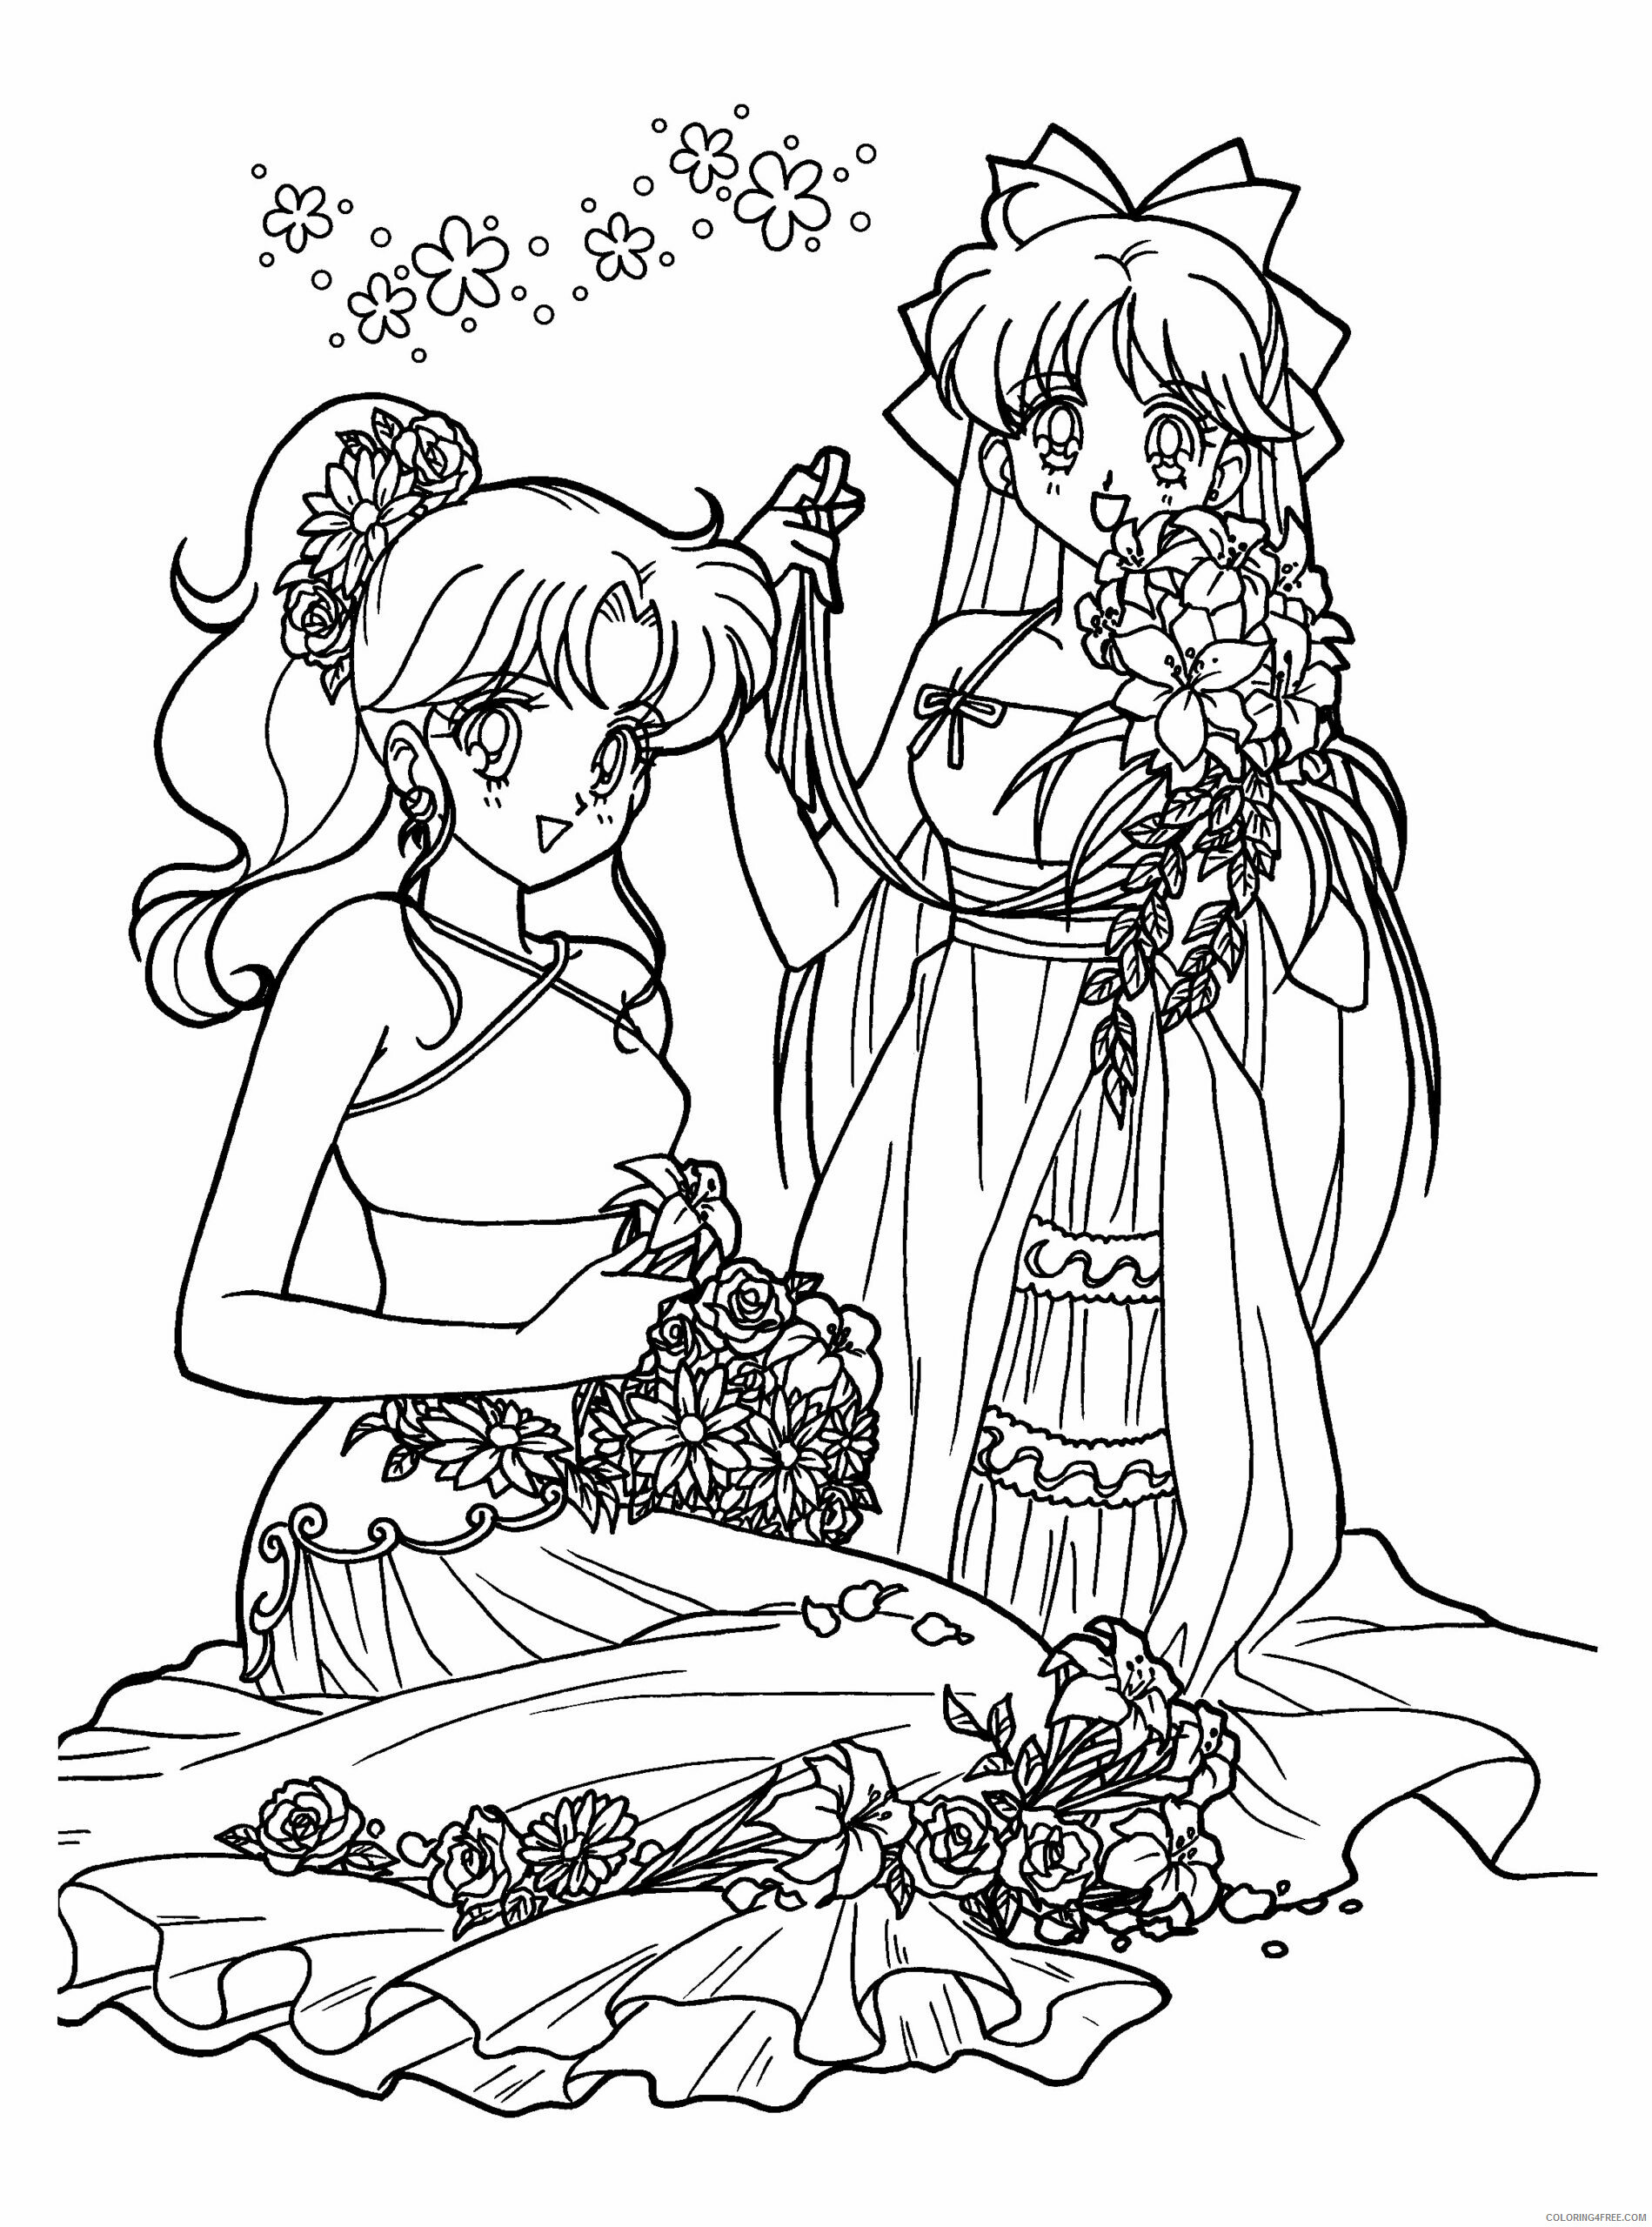 Sailor Moon Printable Coloring Pages Anime sailormoon x9YQx 2021 0999 Coloring4free